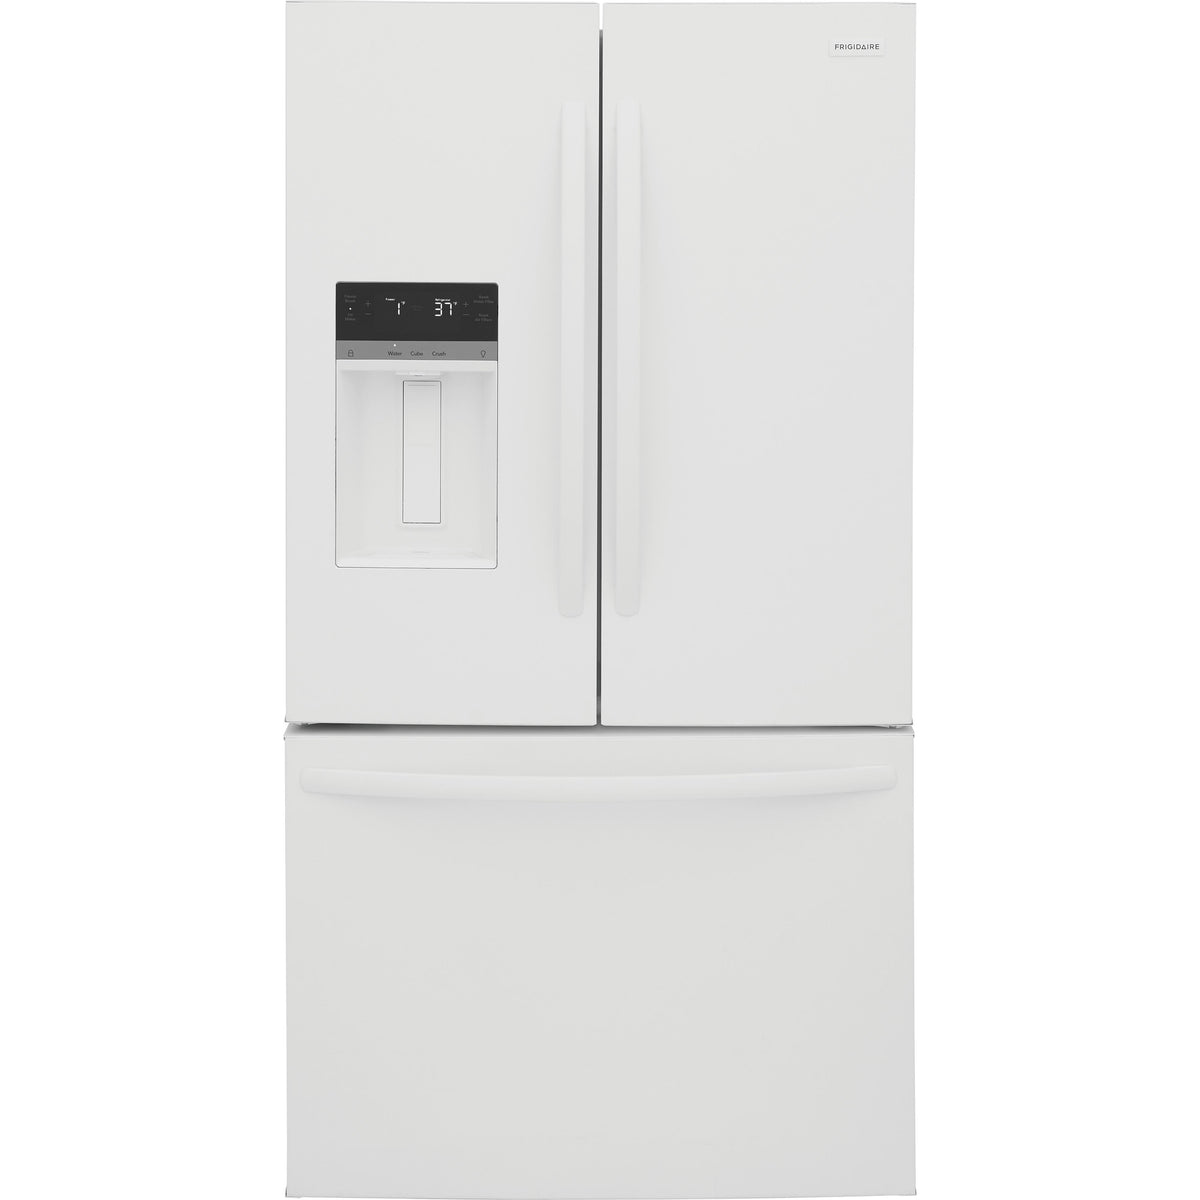 36-inch, 27.8 cu. ft. French 3-Door Refrigerator with Dispenser FRFS2823AW IMAGE 1